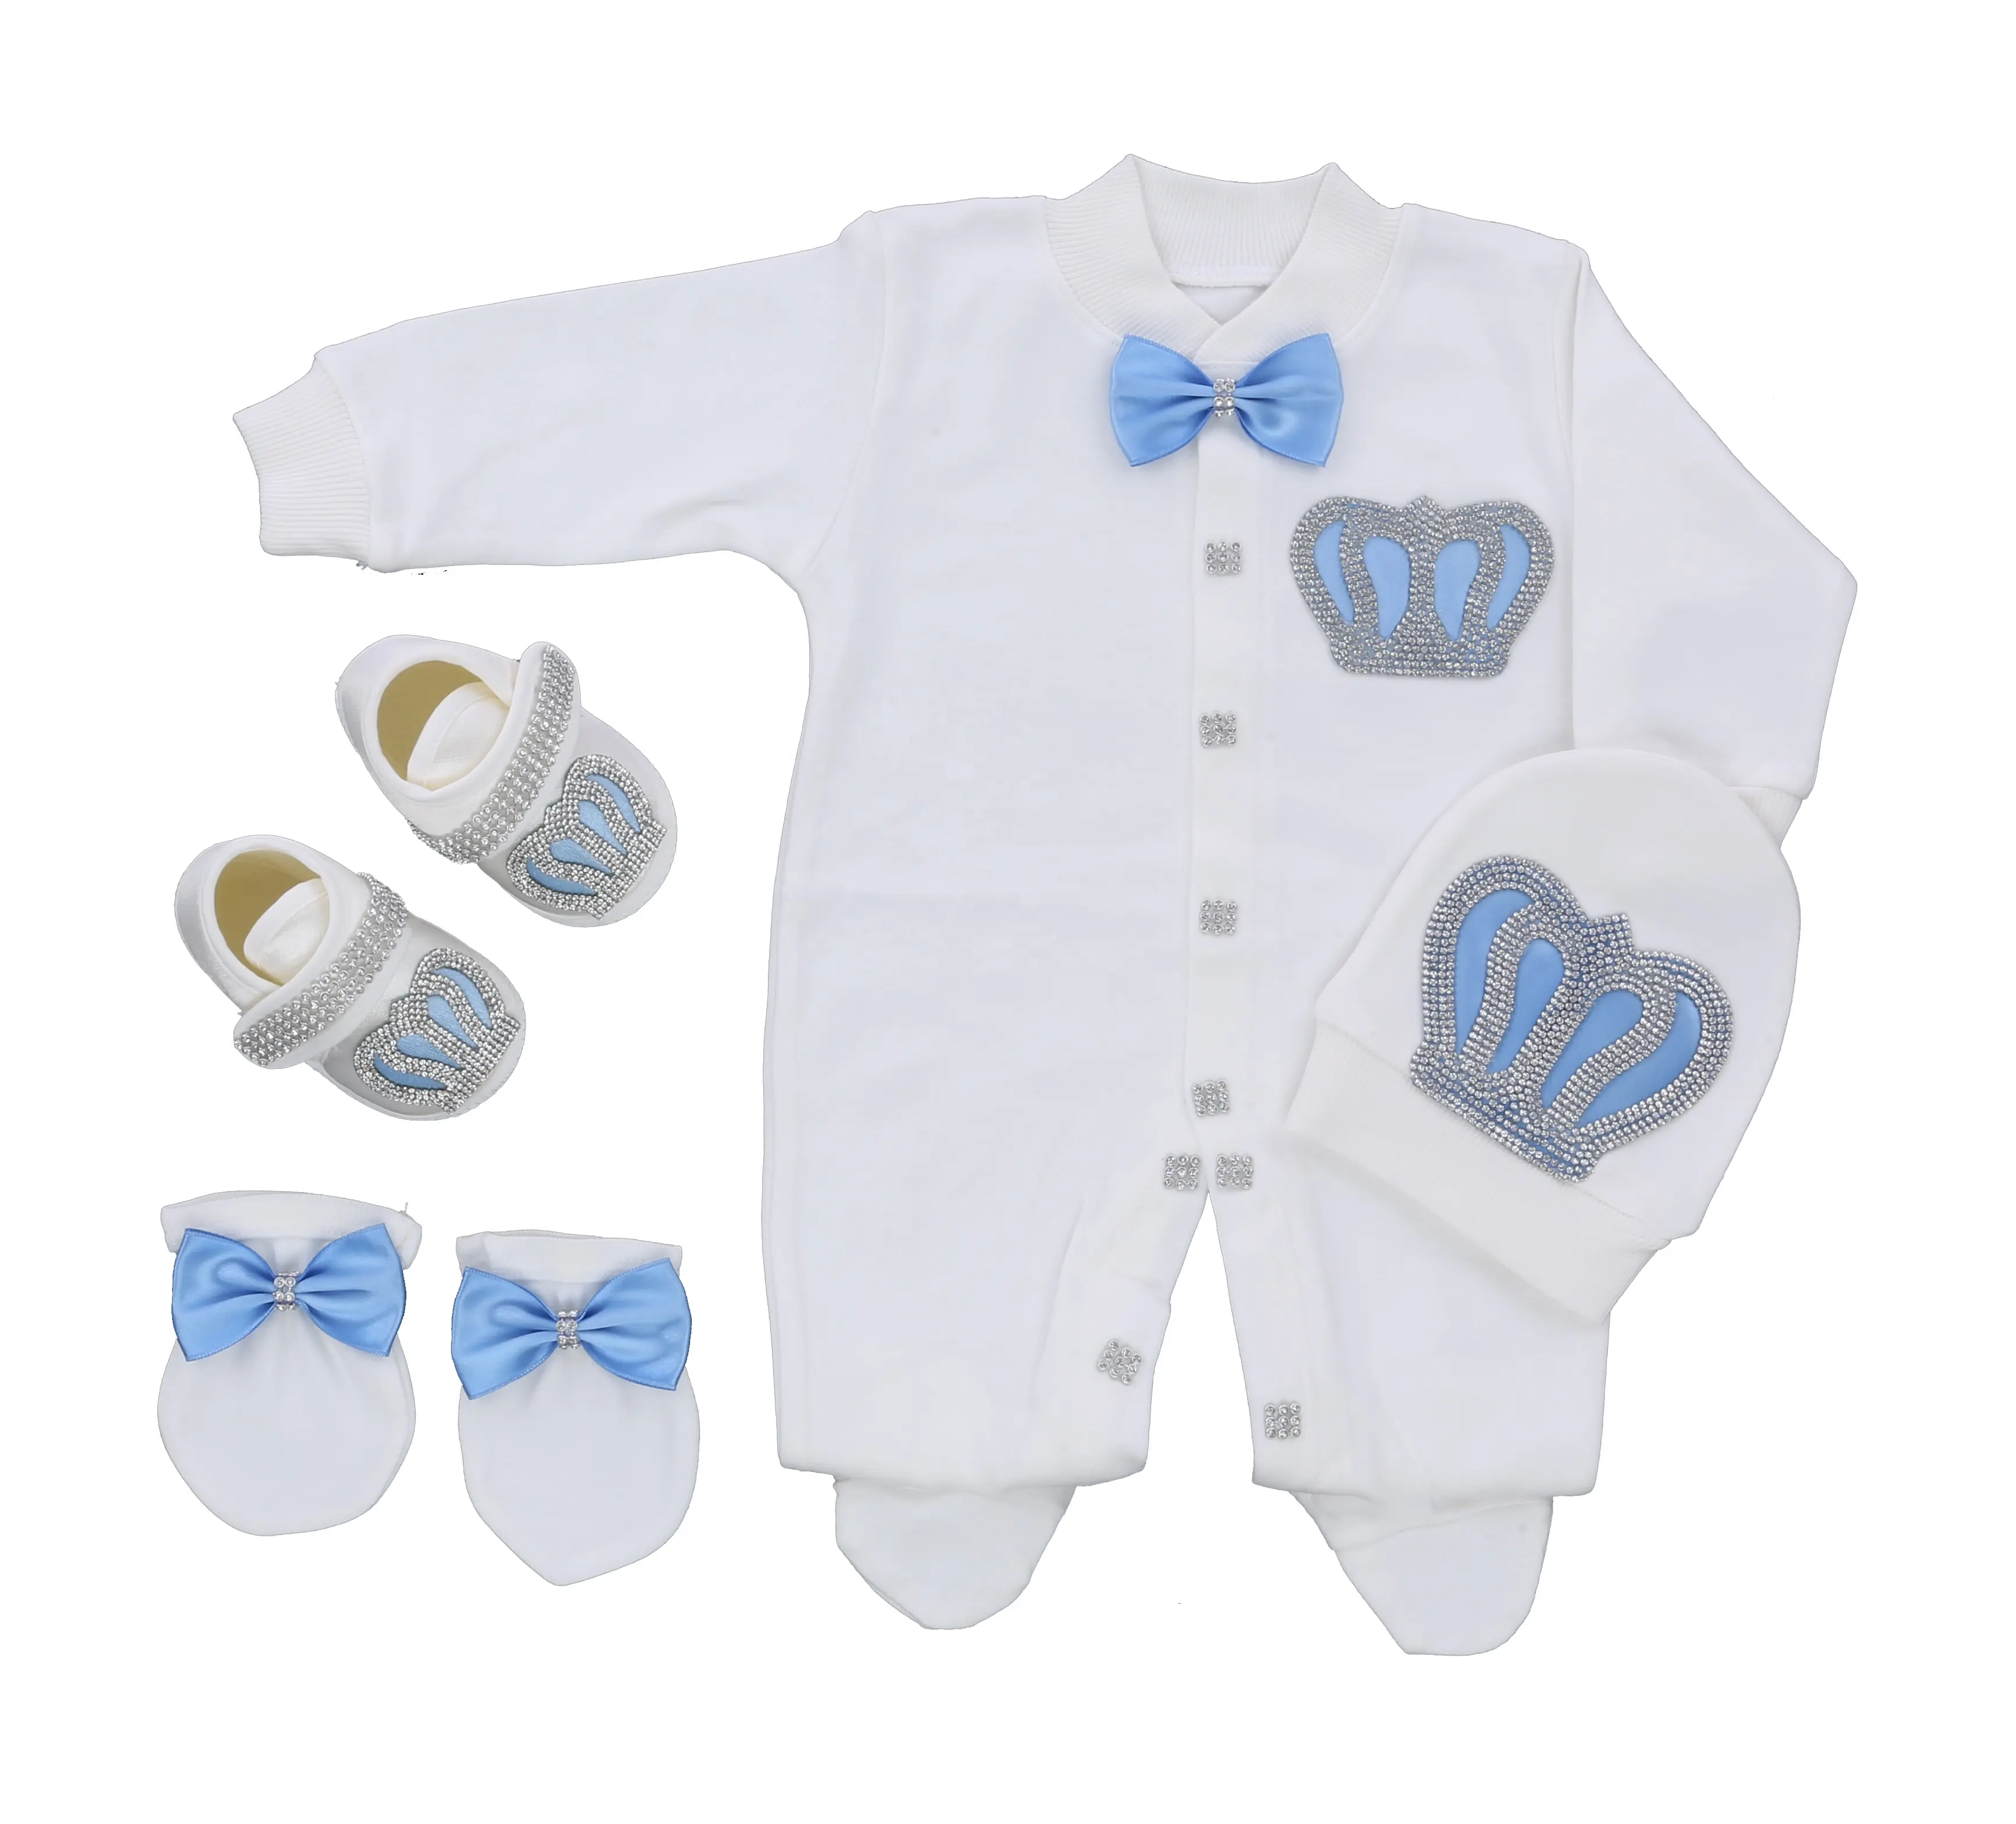 Wholesale Custom Newborn New Design Long Sleeve Bamboo Bubble 100% Cotton 4 Pieces Blue Baby Romper Set Clothes Baby boy